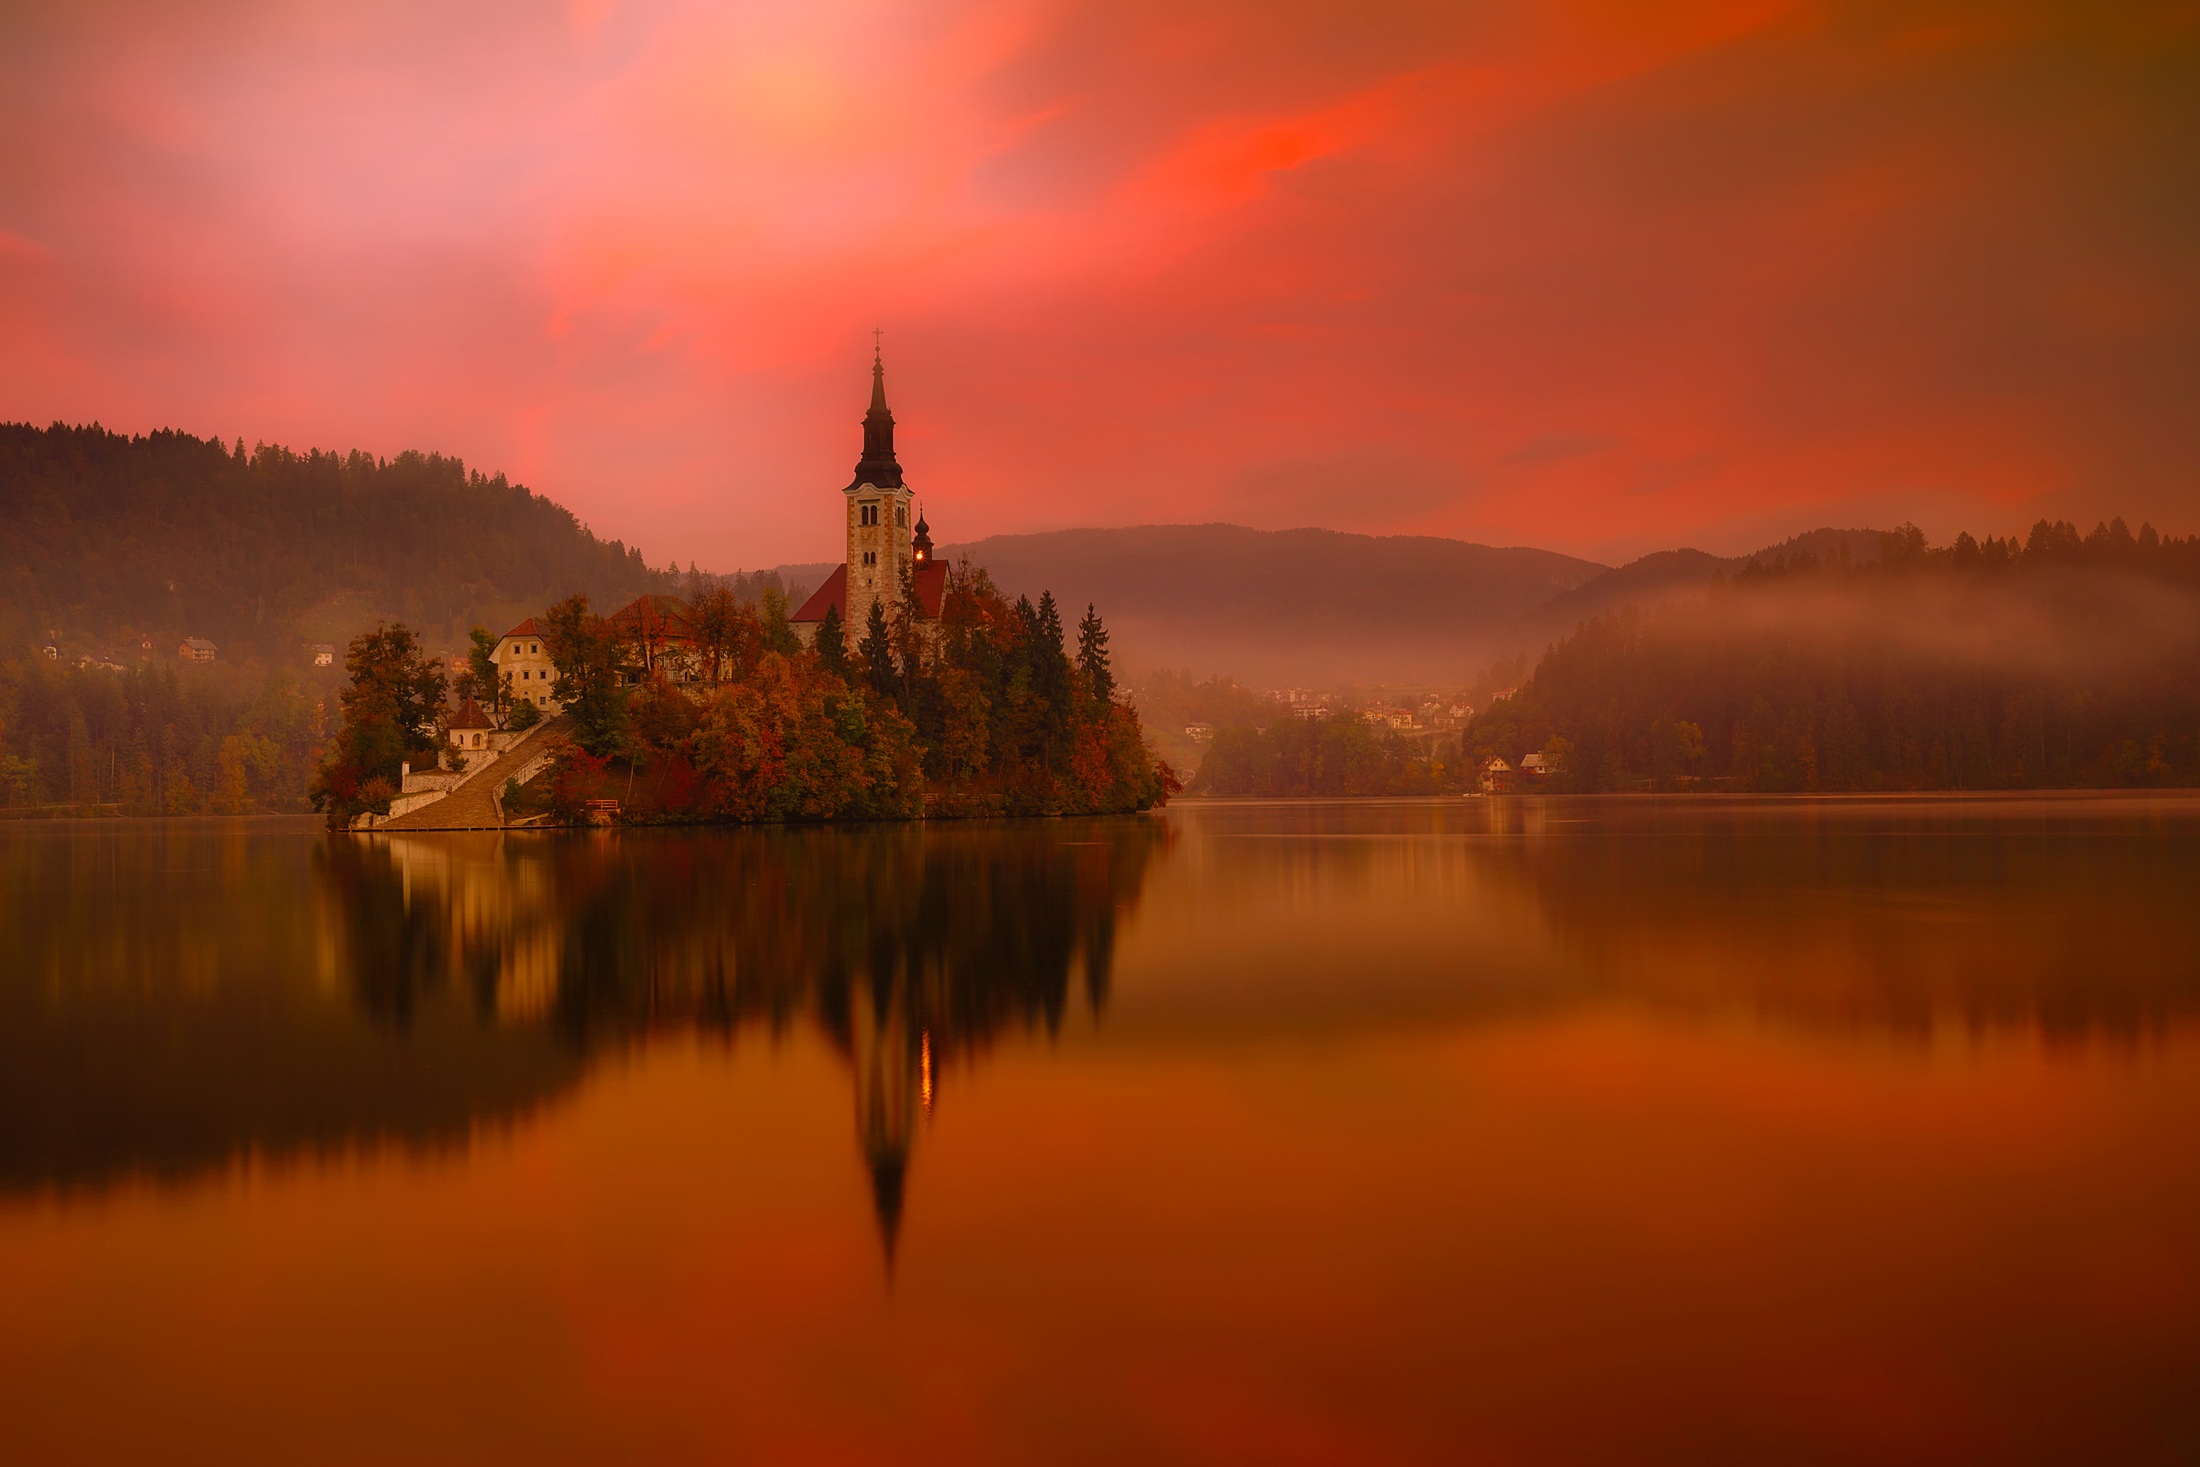 The famous island and church in the middle of Lake Bled in Slovenia by 12019